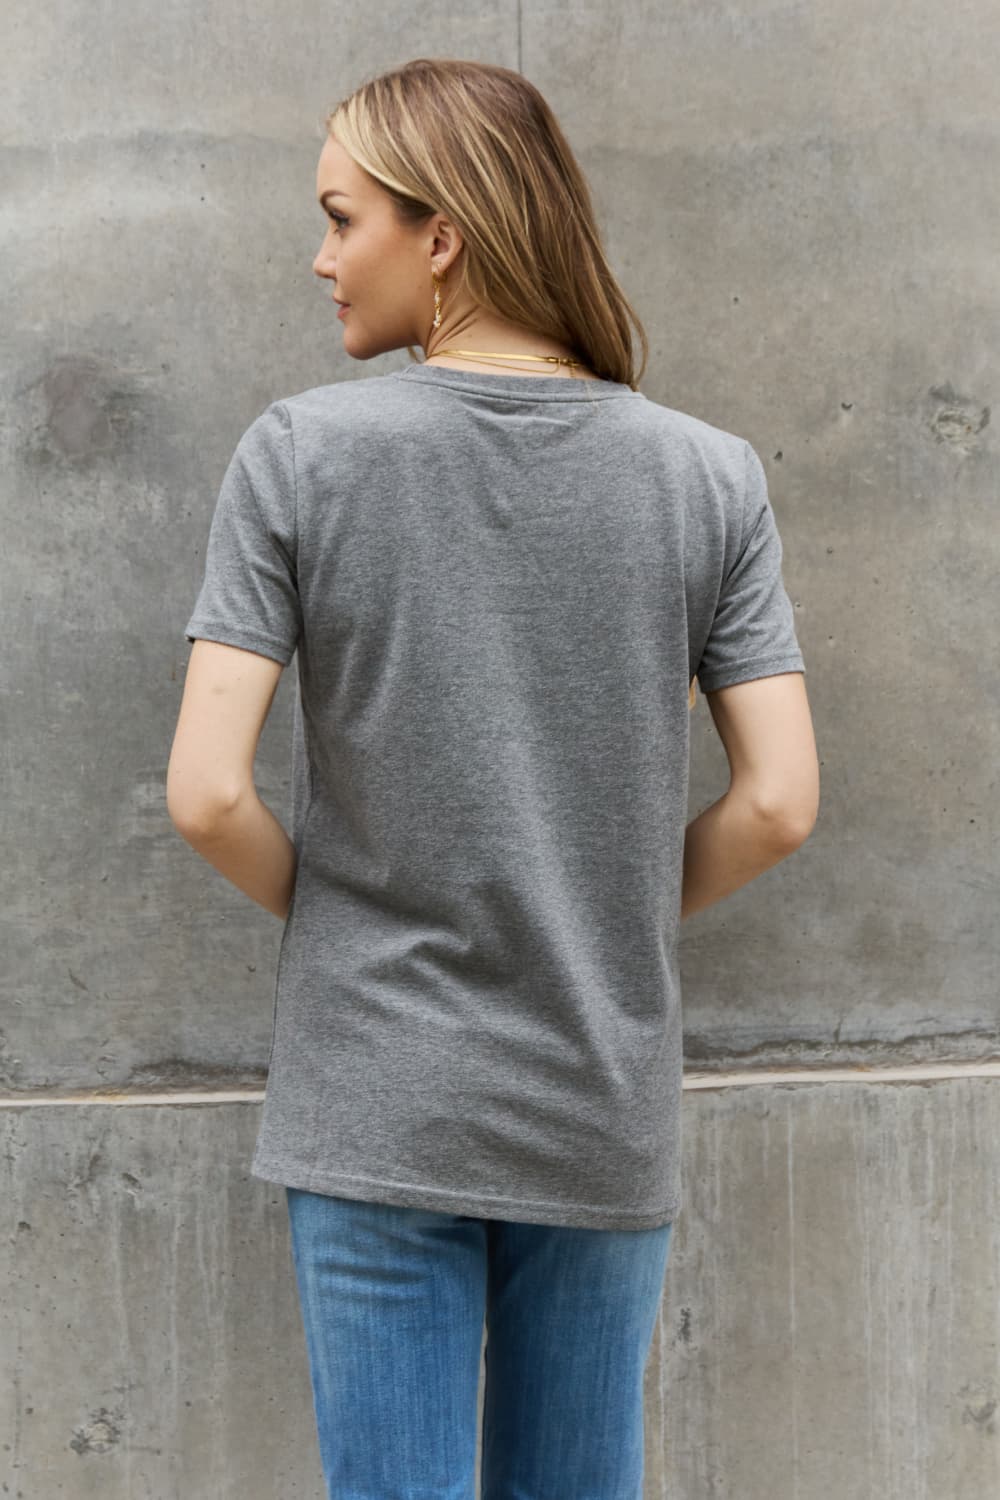 Light Slate Gray Simply Love GROW POSITIVITY Graphic Cotton Tee Sentient Beauty Fashions